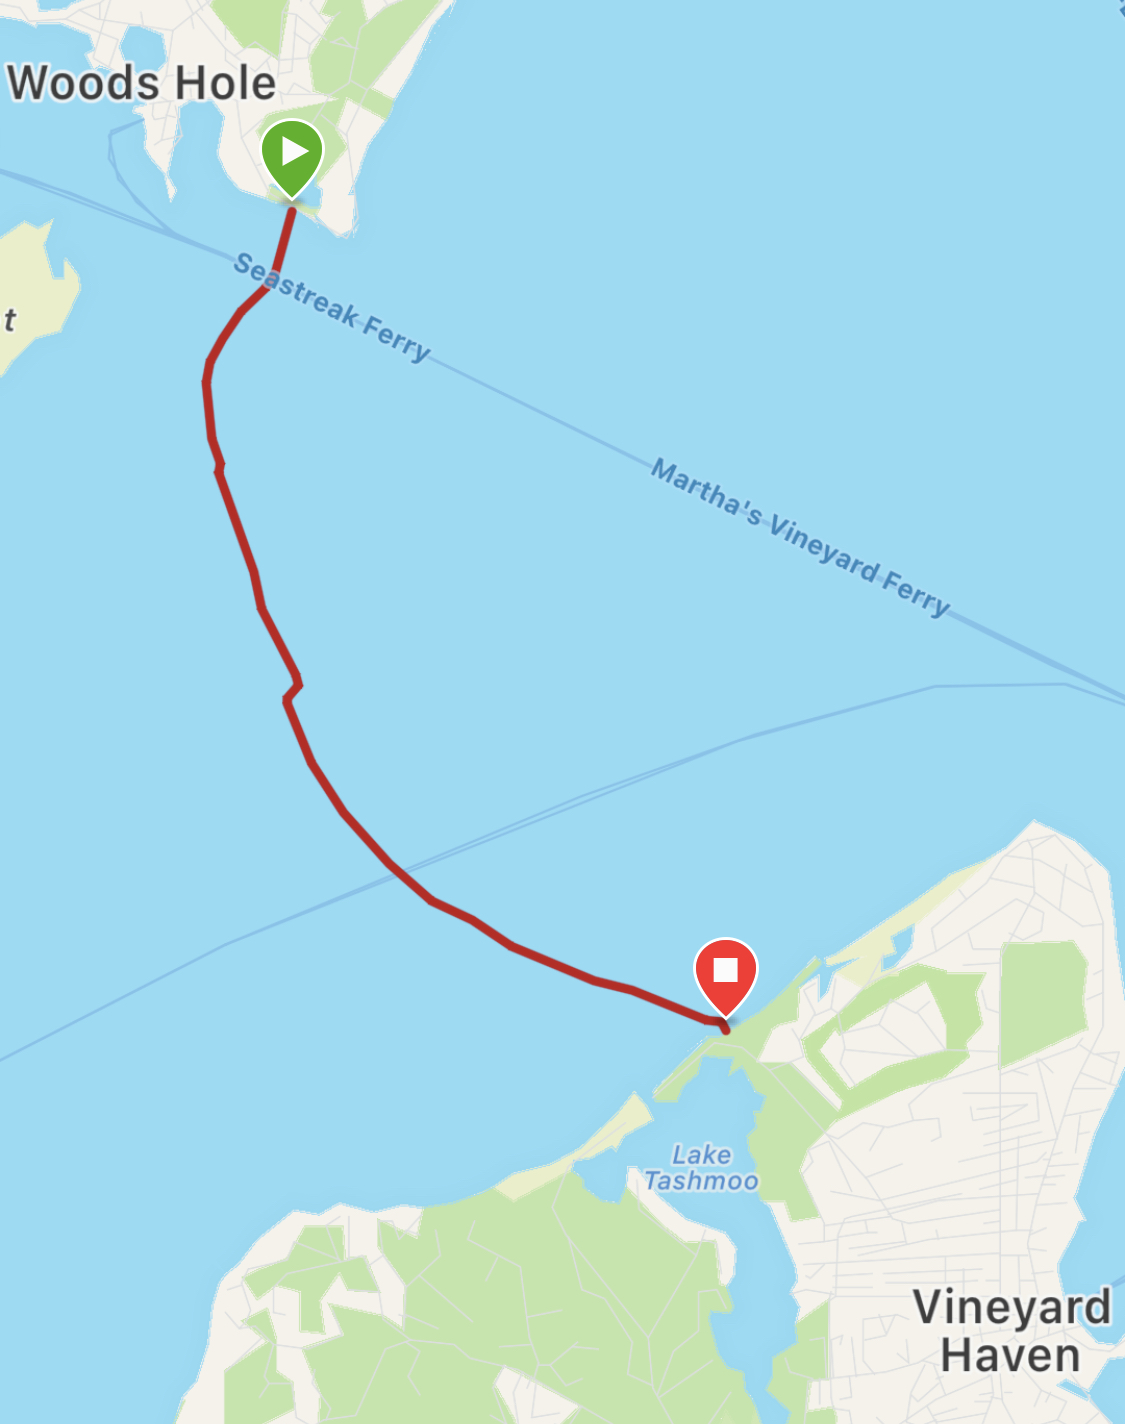 Swim path traversed by Blake Cole, recording using a Garmin Fenix 7S smartwatch, with multi-band GNSS mode enabled.